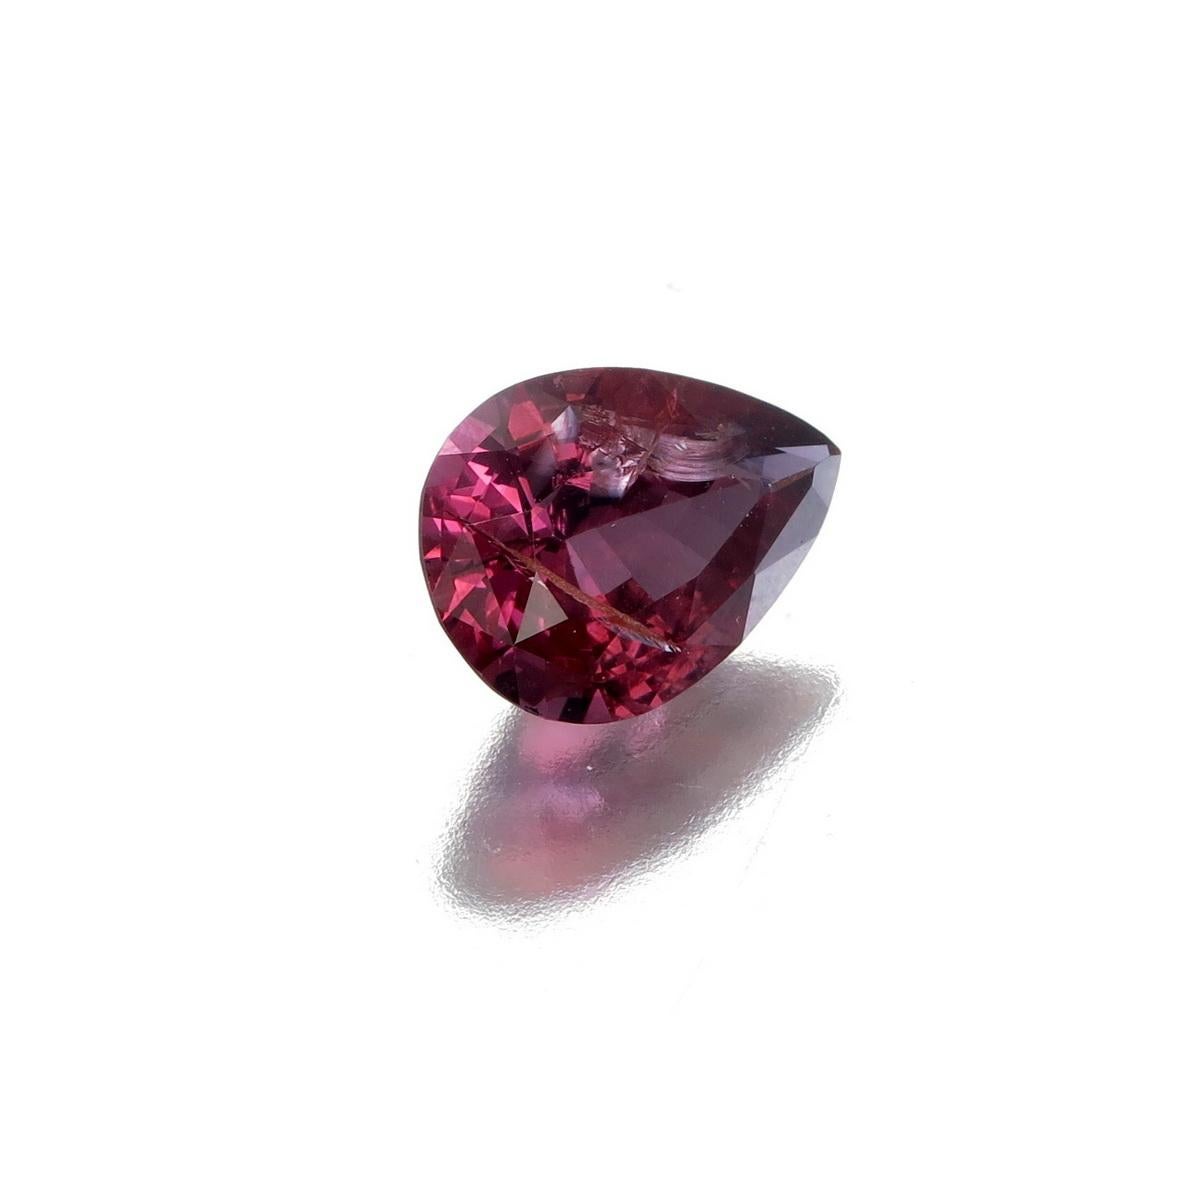 Pear Cut 1.81 Carat Vivid Red Natural Spinel from Burma For Sale